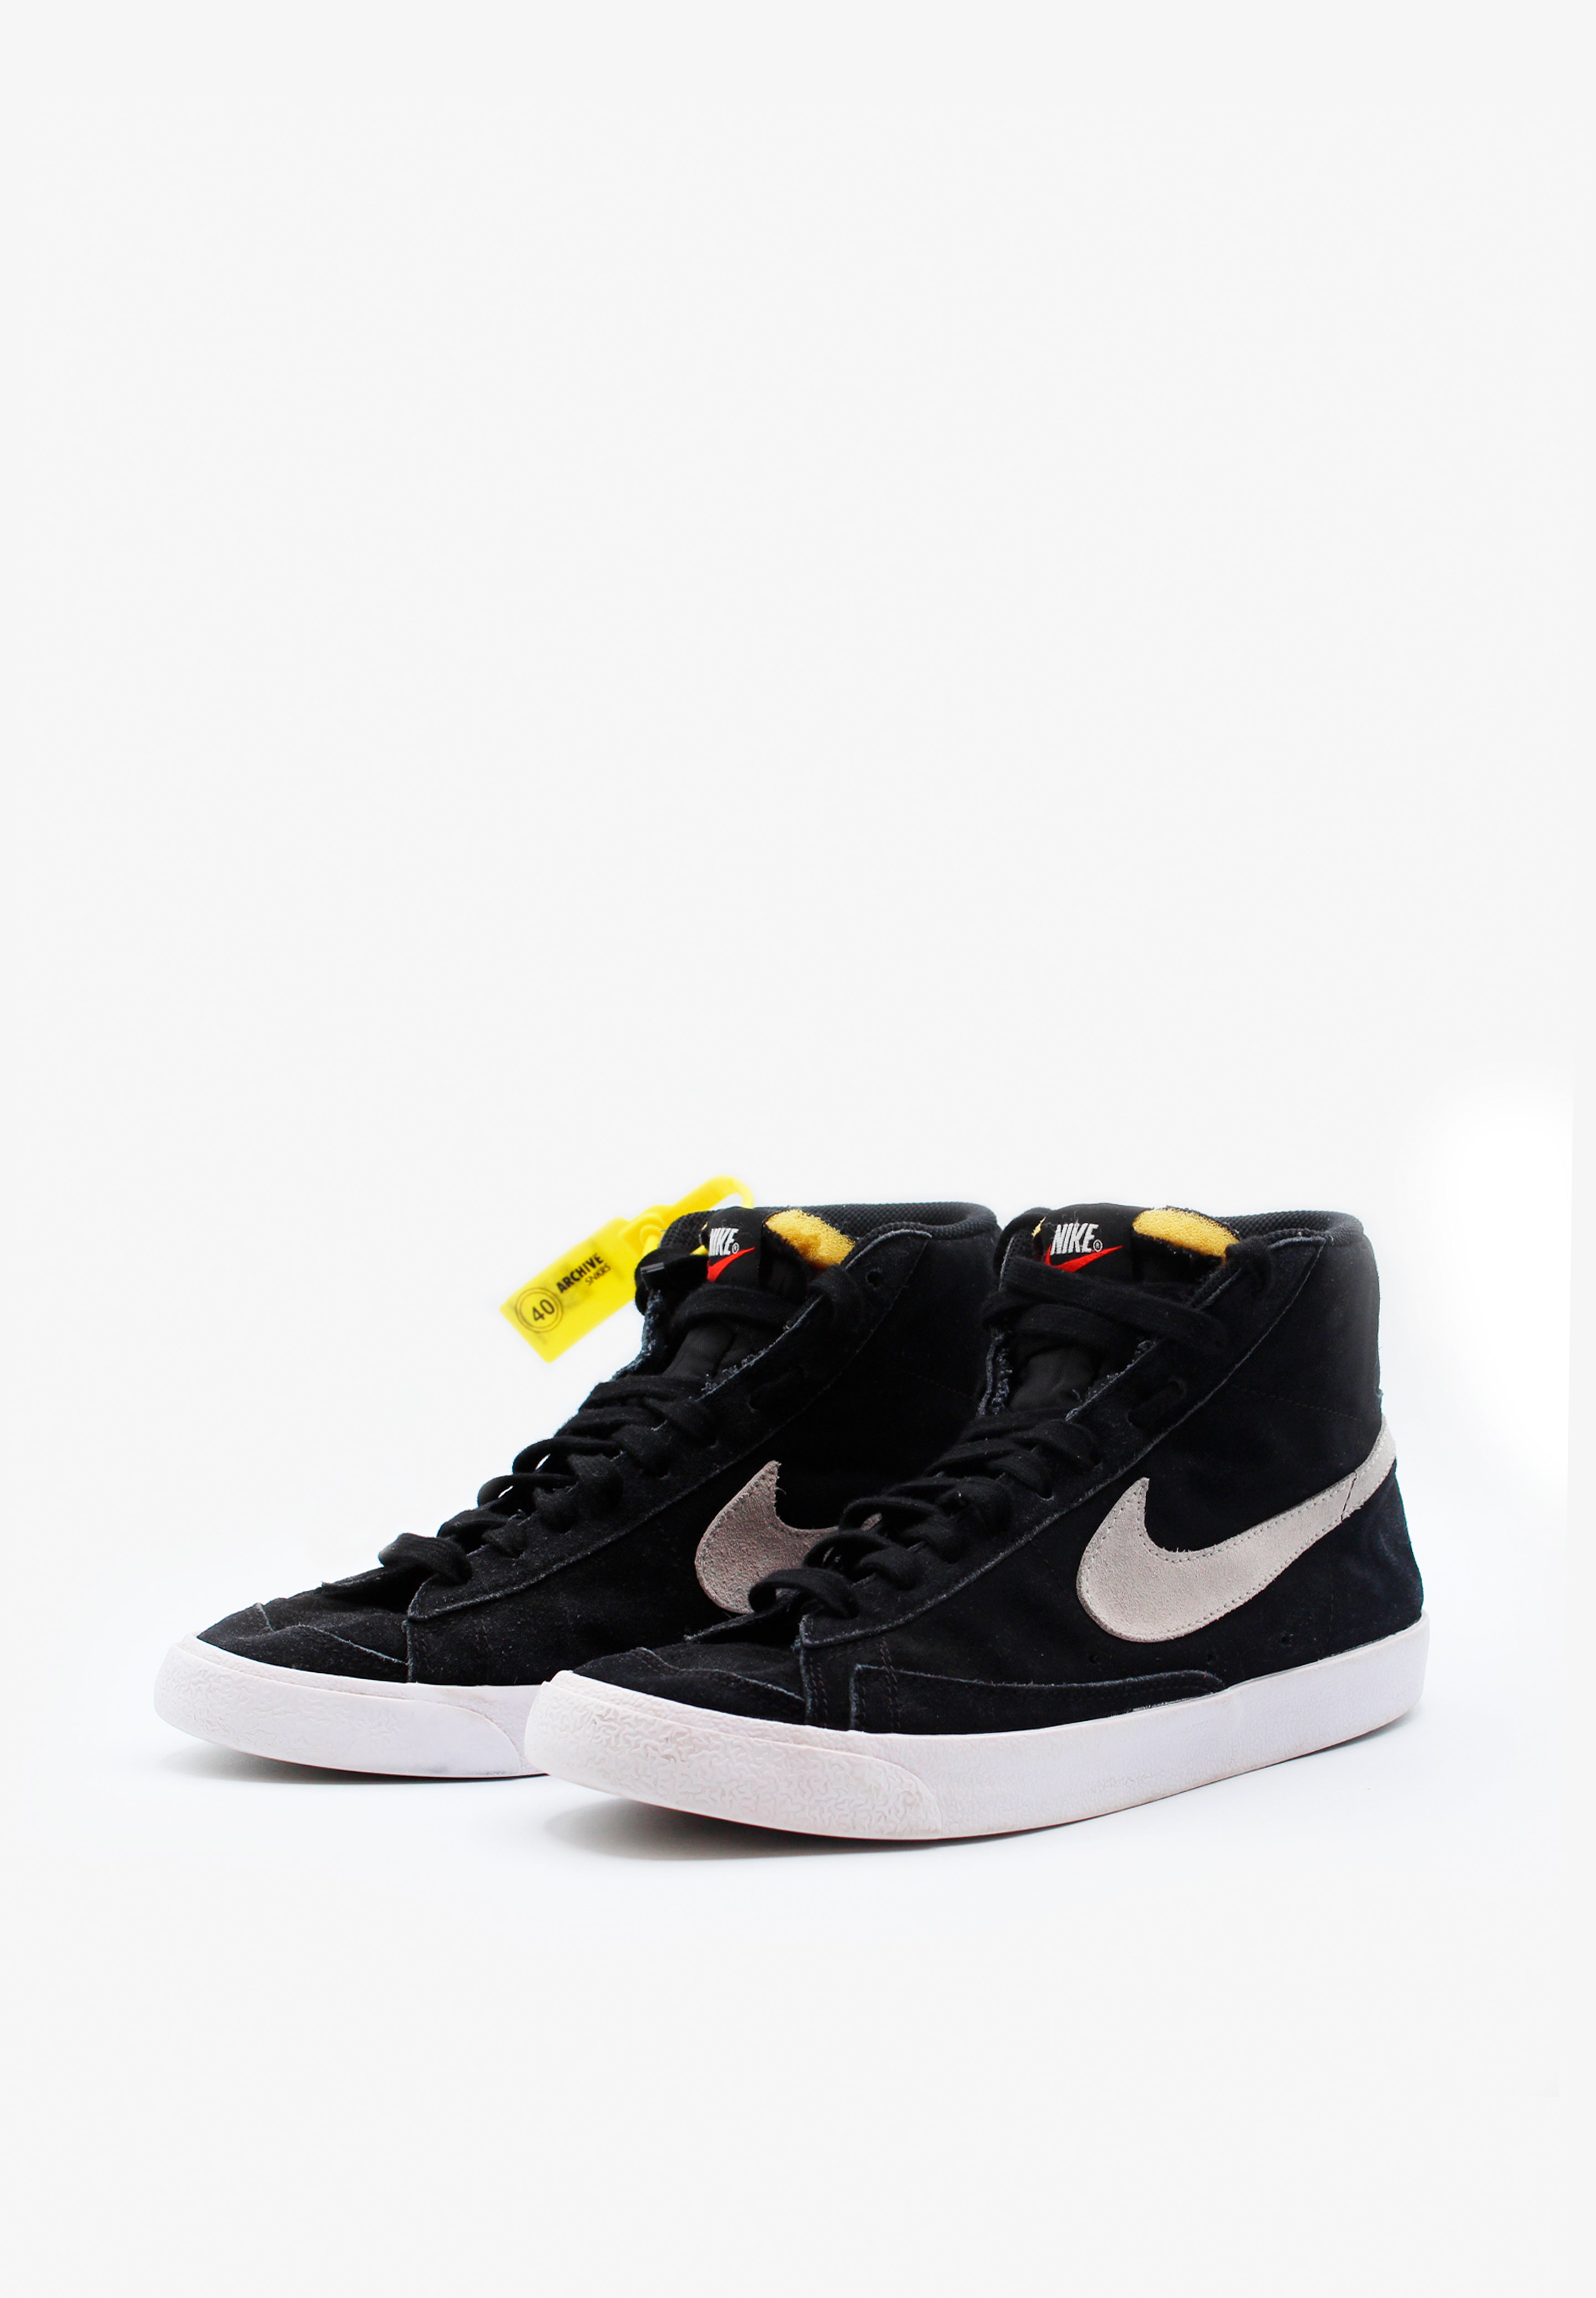 ARCHIVE SNEAKRS | SNEAKERS NIKE BLAZER MID 77 SUEDE TALLA 40.5